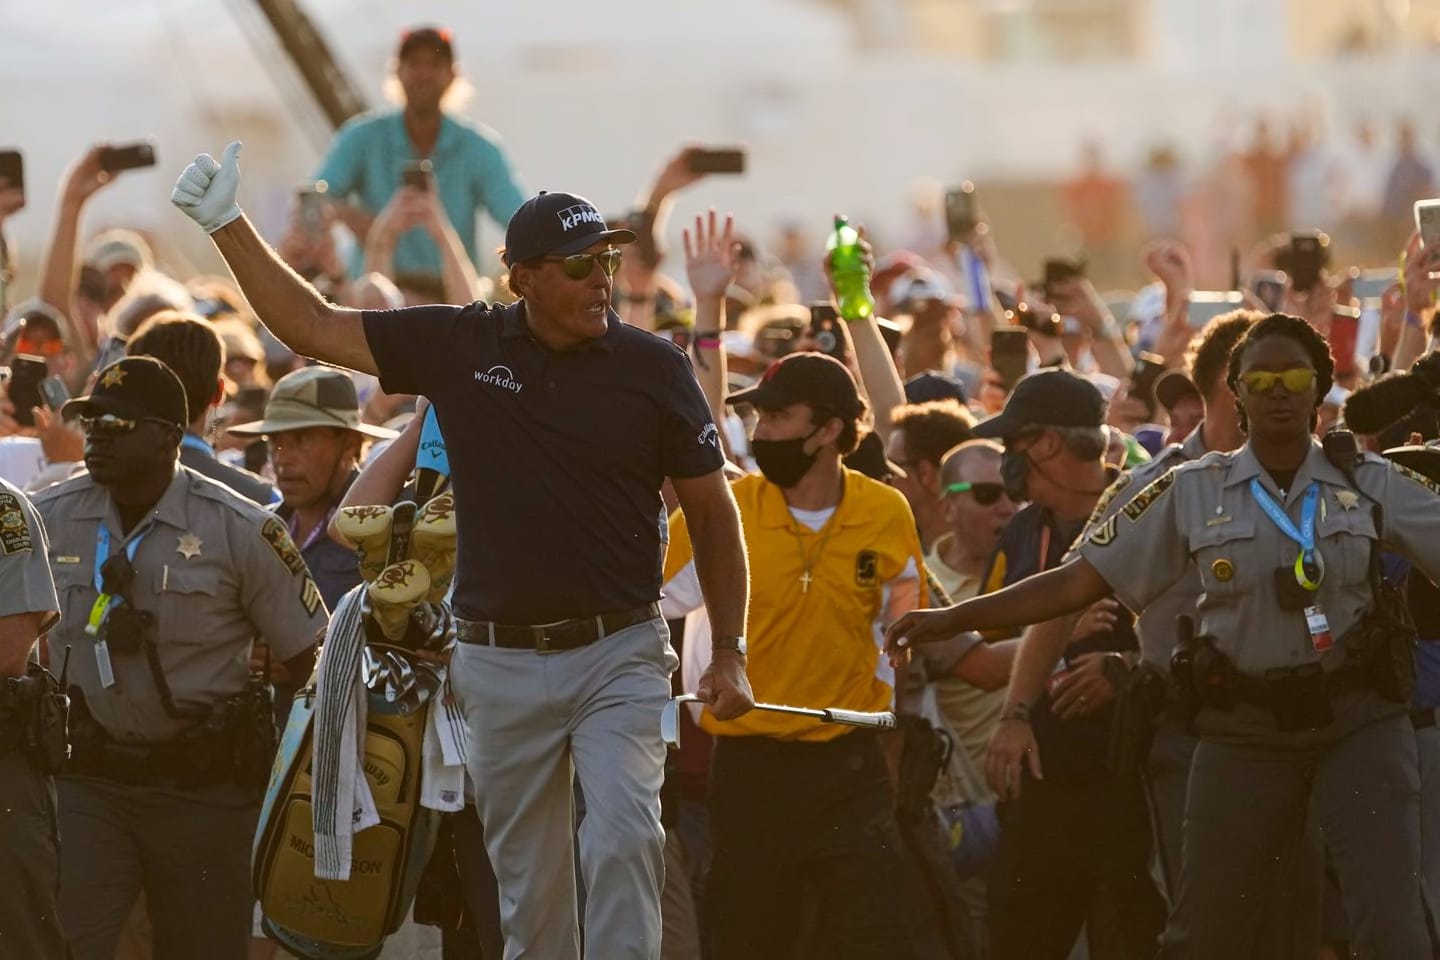 Phil Mickelson had the support of fans all Sunday as he made his run.